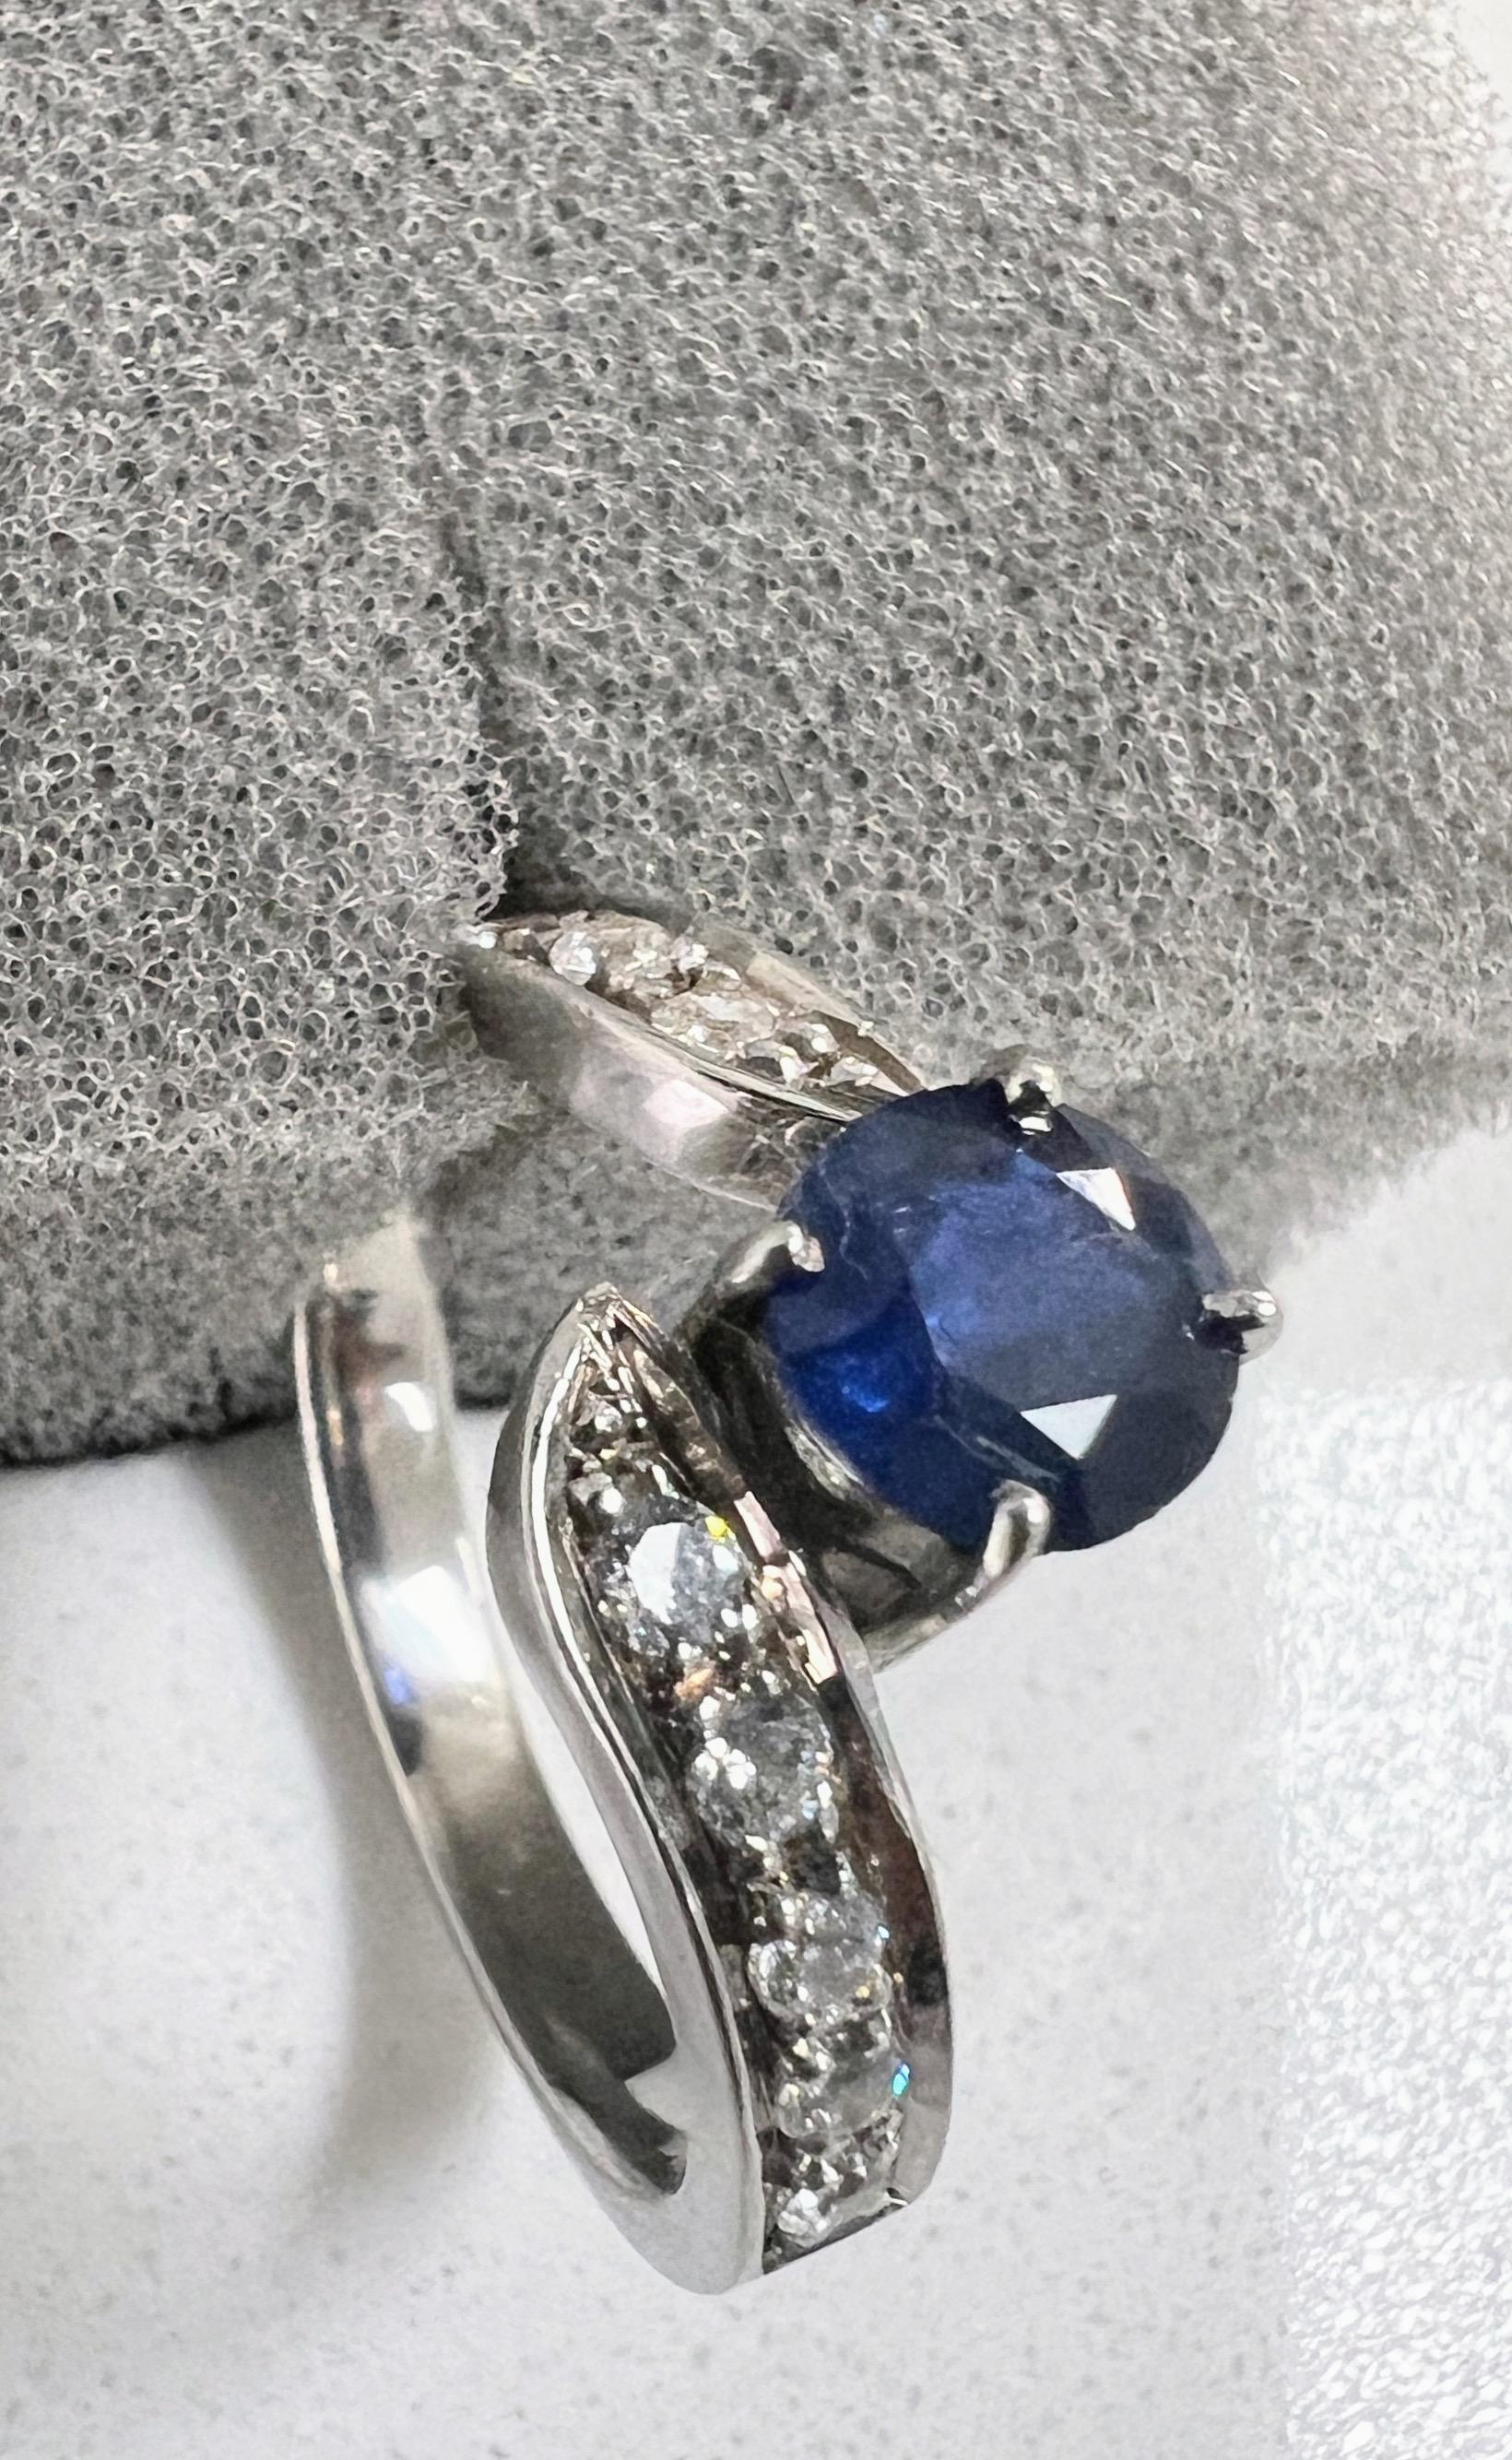 Elevate your love story with our enchanting 1ct Blue Sapphire Ring, surrounded by a shimmering halo of dazzling white sapphires on both sides. 

Key Features:
Adorned with a breathtaking 1ct blue sapphire, symbolizing loyalty, sincerity, and